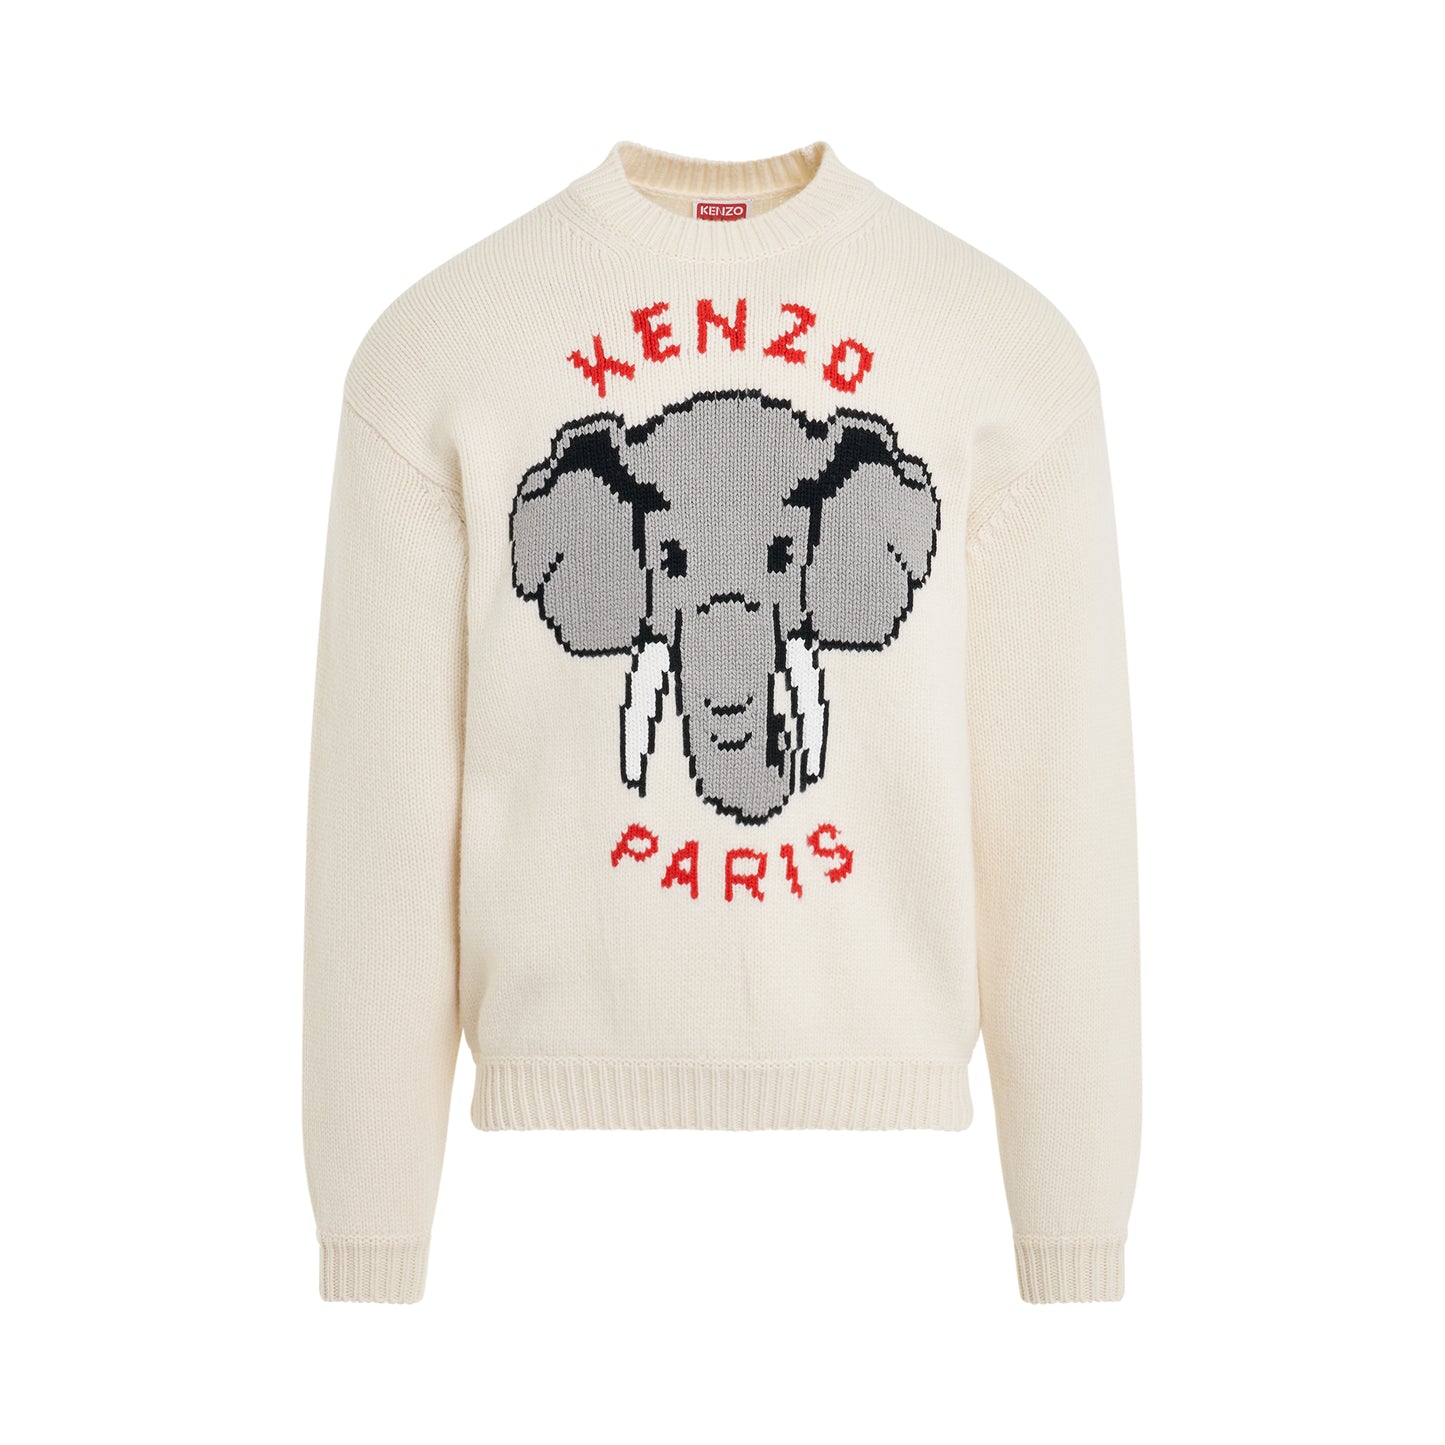 Kenzo Elephant Knit Sweater in Off White